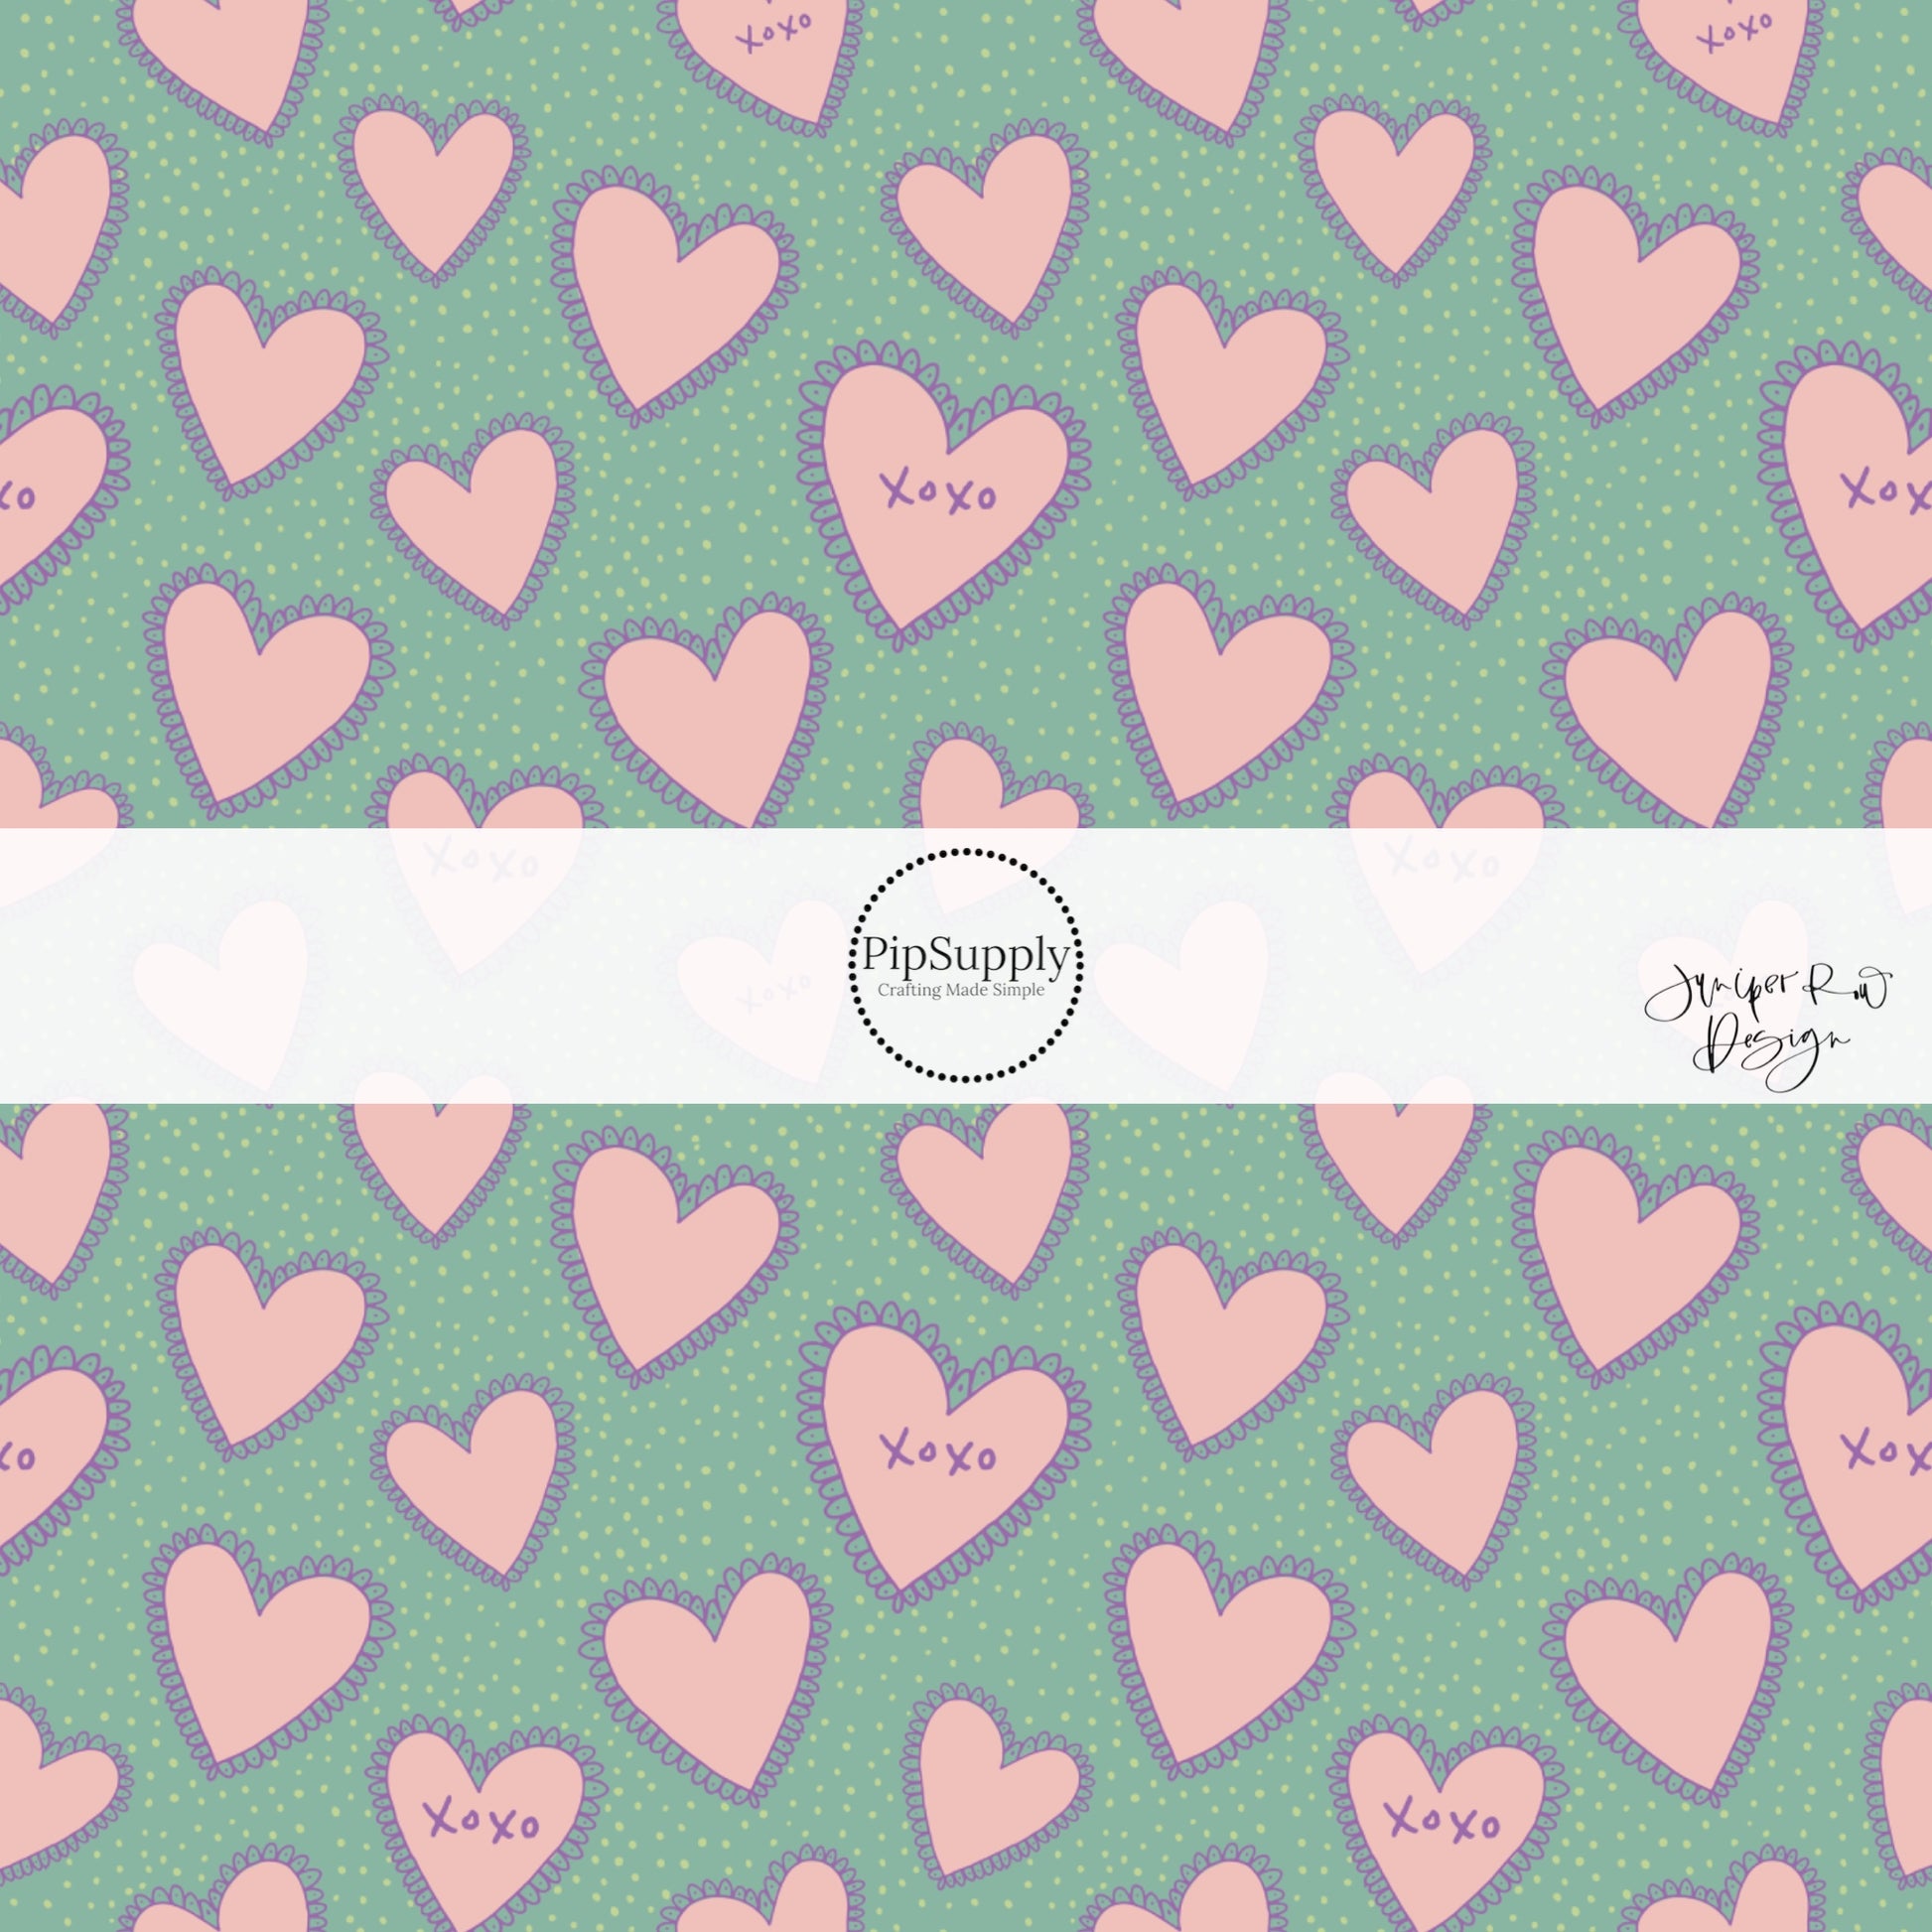 White polka dot with pink hearts outlined in purple with xoxo words on bow strips